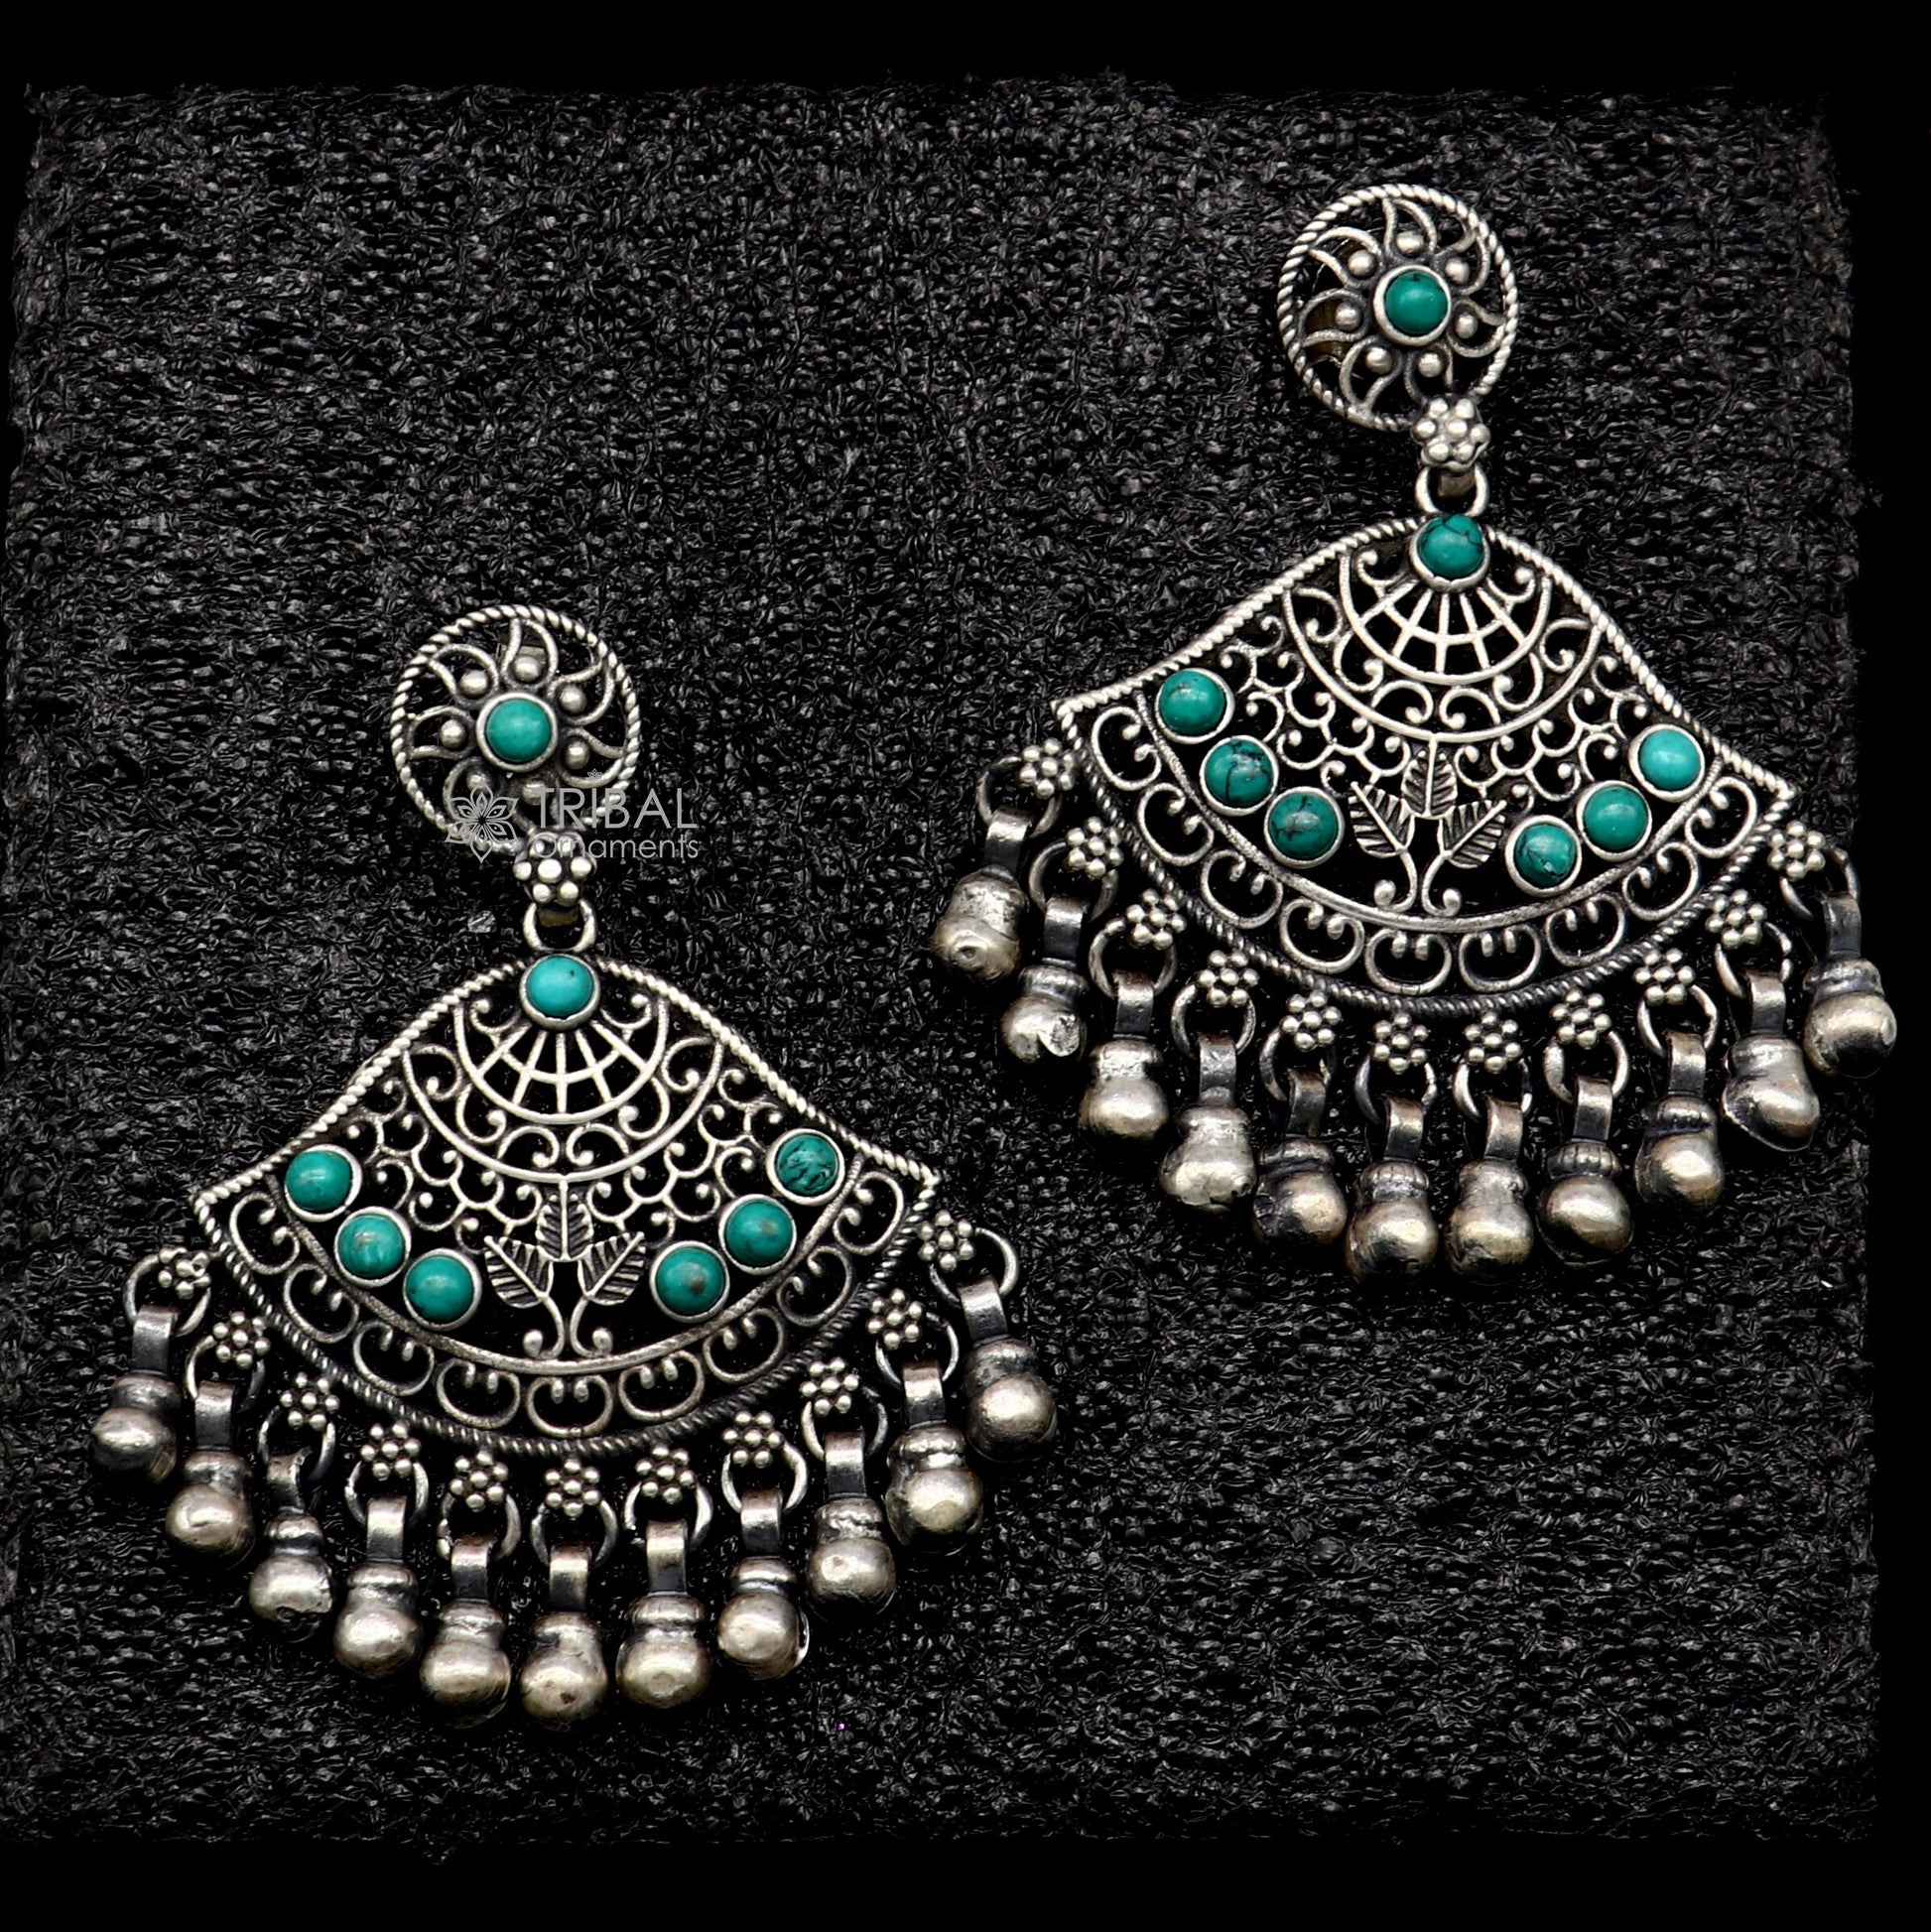 925 sterling silver handmade floral design turquoise stone stud earrings with hanging bells Ghungroo ethnic brides functional jewelry s1234 - TRIBAL ORNAMENTS